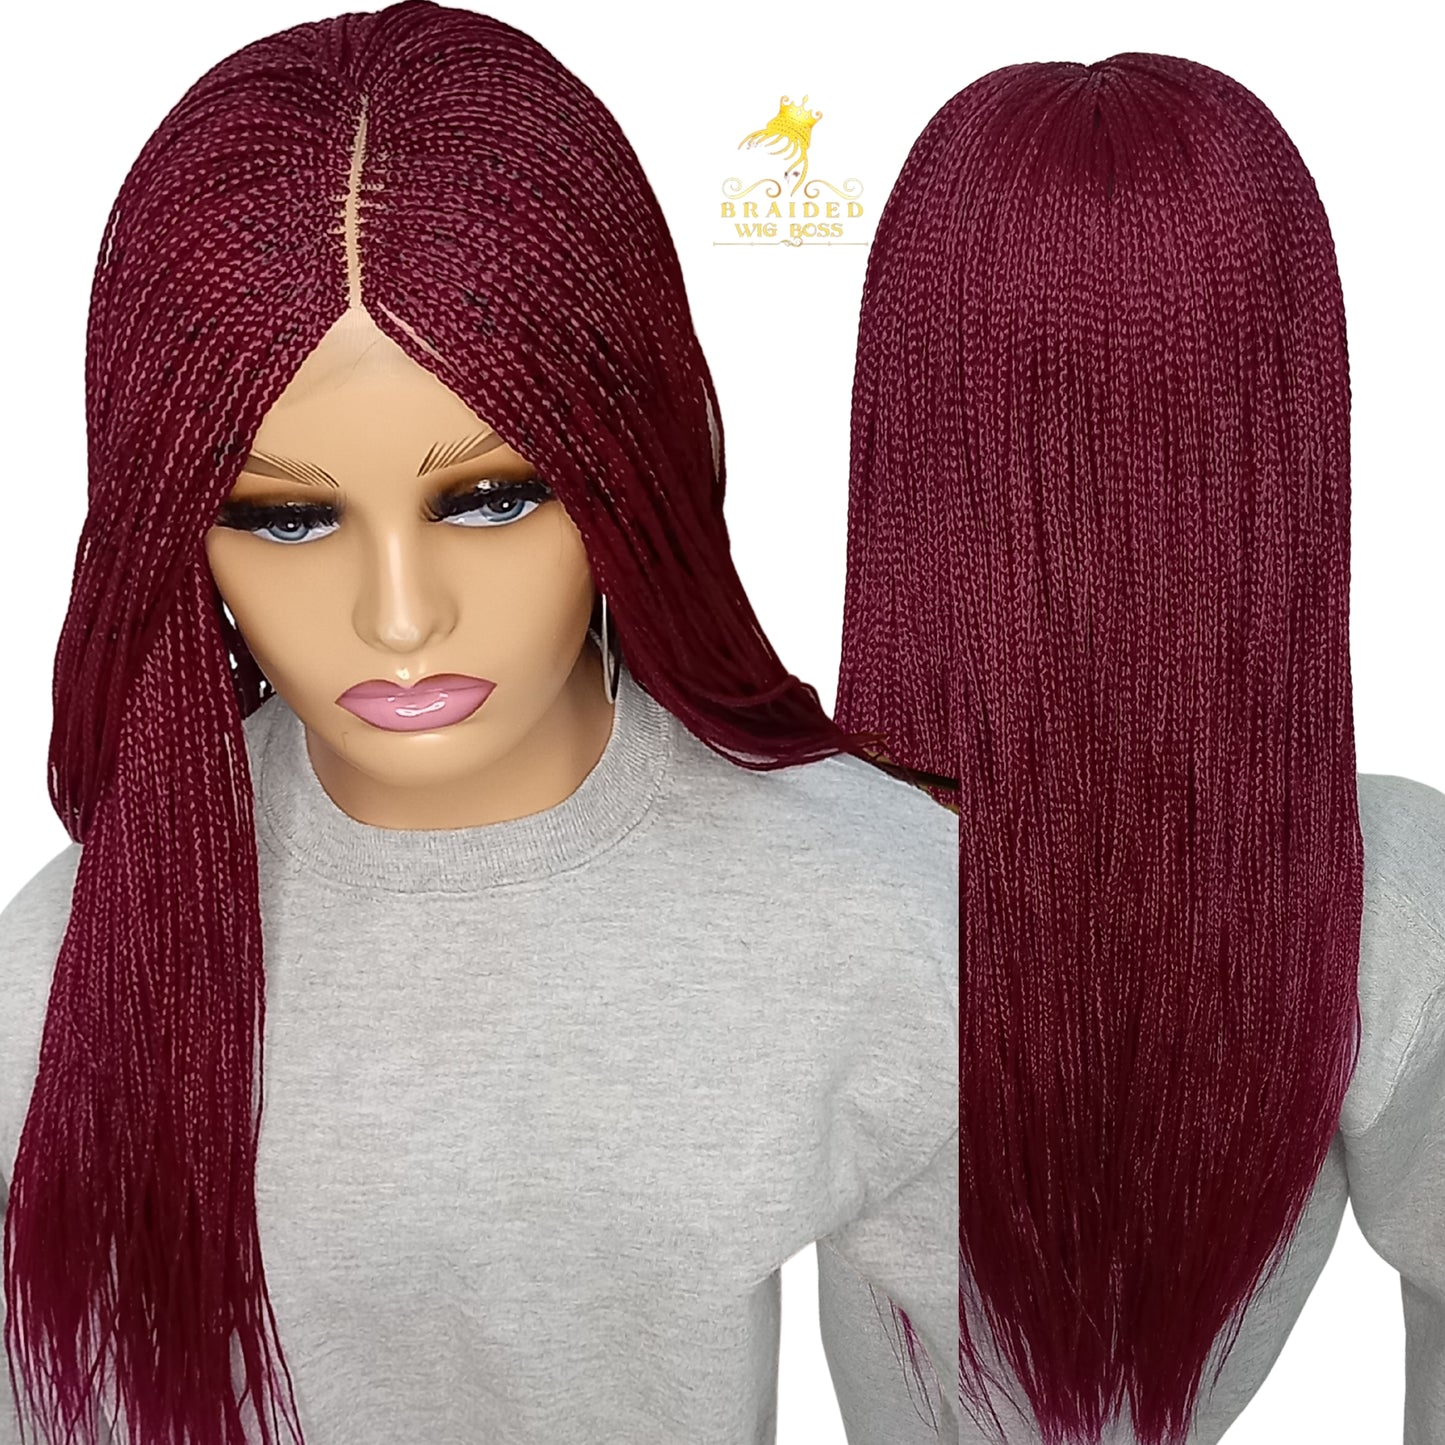 Burgundy Micro Braid Wig in Various Lengths and Colors | Wholesale and Retail Details Available